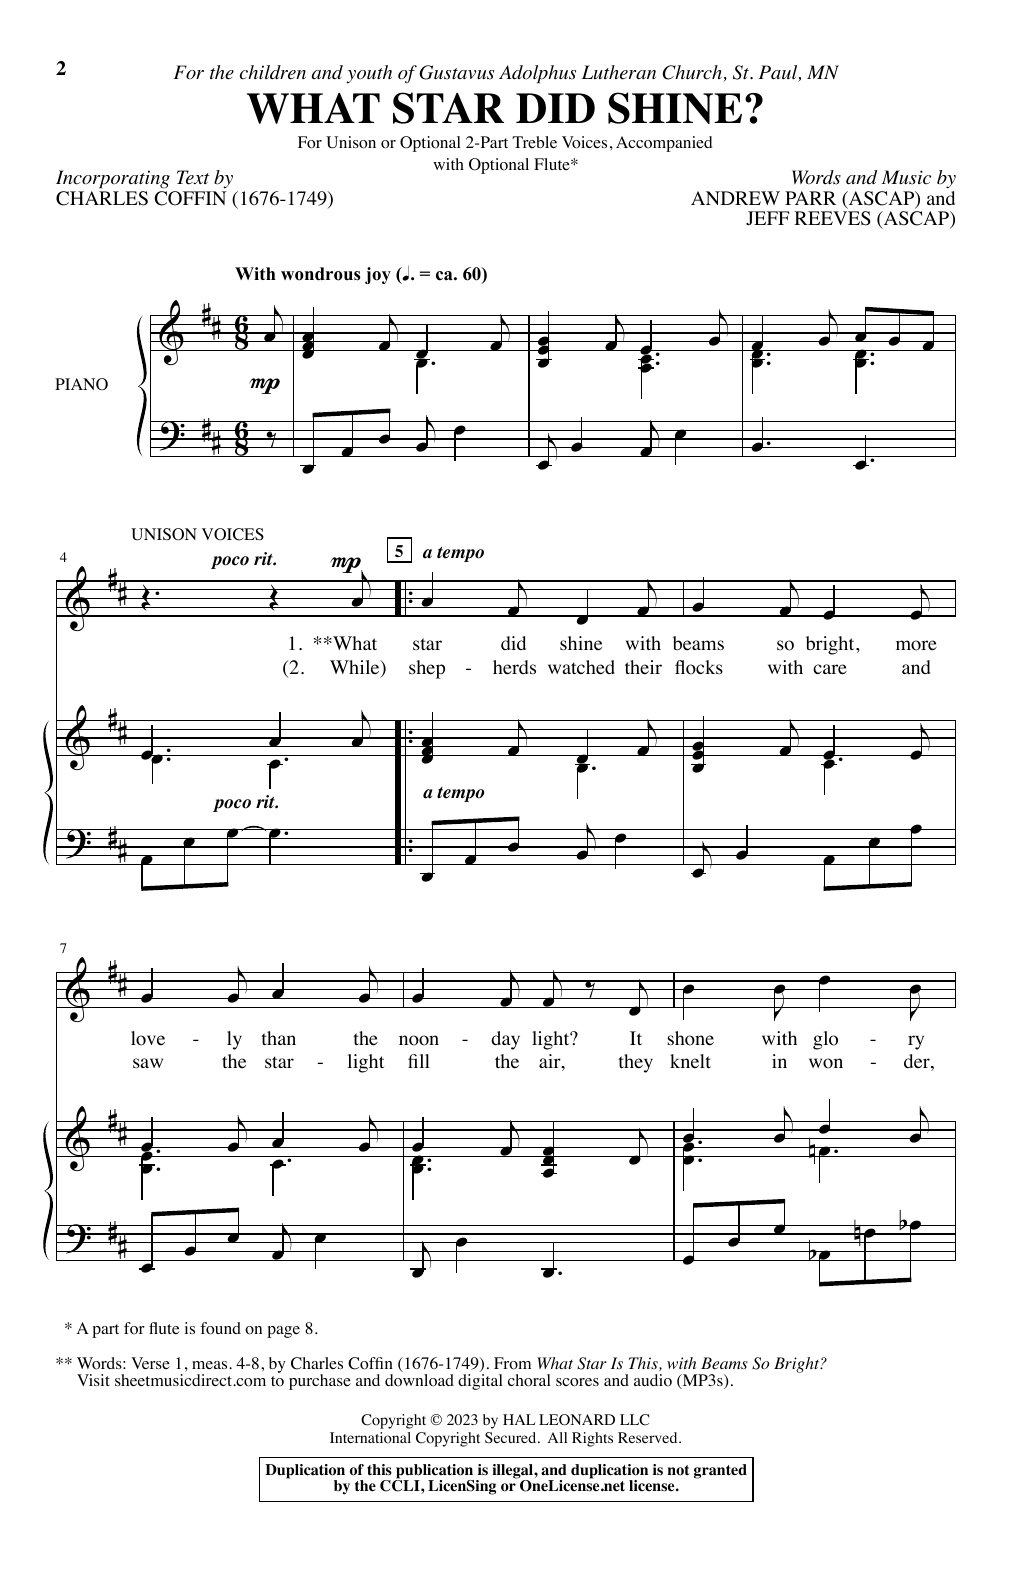 Download Andrew Parr and Jeff Reeves What Star Did Shine? Sheet Music